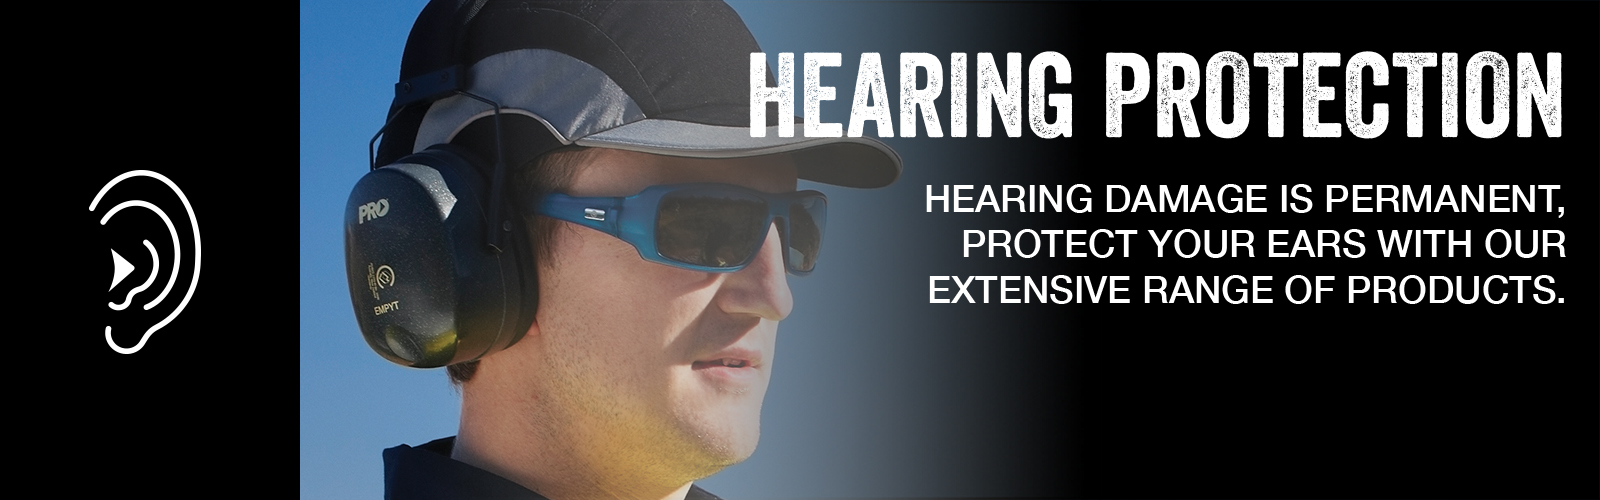 <h1><span style="font-size: 24px;"><img src="/images/CategoryImages/PRO/PROCHOICEHEARING-PROTECTION.png?u=1YAbg4">HEARING PROTECTION</span></h1>
<p><span style="font-size: 14px;">The Pro Choice Safety Gear range of hearing protection has everyday workers covered in some of the most challenging workplaces. We meet all necessary safety certification for hearing protection in Australia and New Zealand.</span></p>
<p><span style="font-size: 14px;">Whether your customers require the permanent, long-term heating protection of earmuffs, or the convenience of disposable foam earplugs, you can be assusred that there is hearing protection for any job or situation.</span></p>
<p><span style="font-size: 14px;">For easy access to this important PPE in the workplace, we can supply ear plug dispenser stations and refills. Hearing Protection is one of the most important items of Personal Protective Equipment to use in the workplace and Pro Choice Safety Gear supplies the best range available.</span></p>
<p><span style="font-size: 14px;">Listen to the experts and protect your hearing by choosing safety gear for ears from Pro Choice Safety Gear.</span></p>